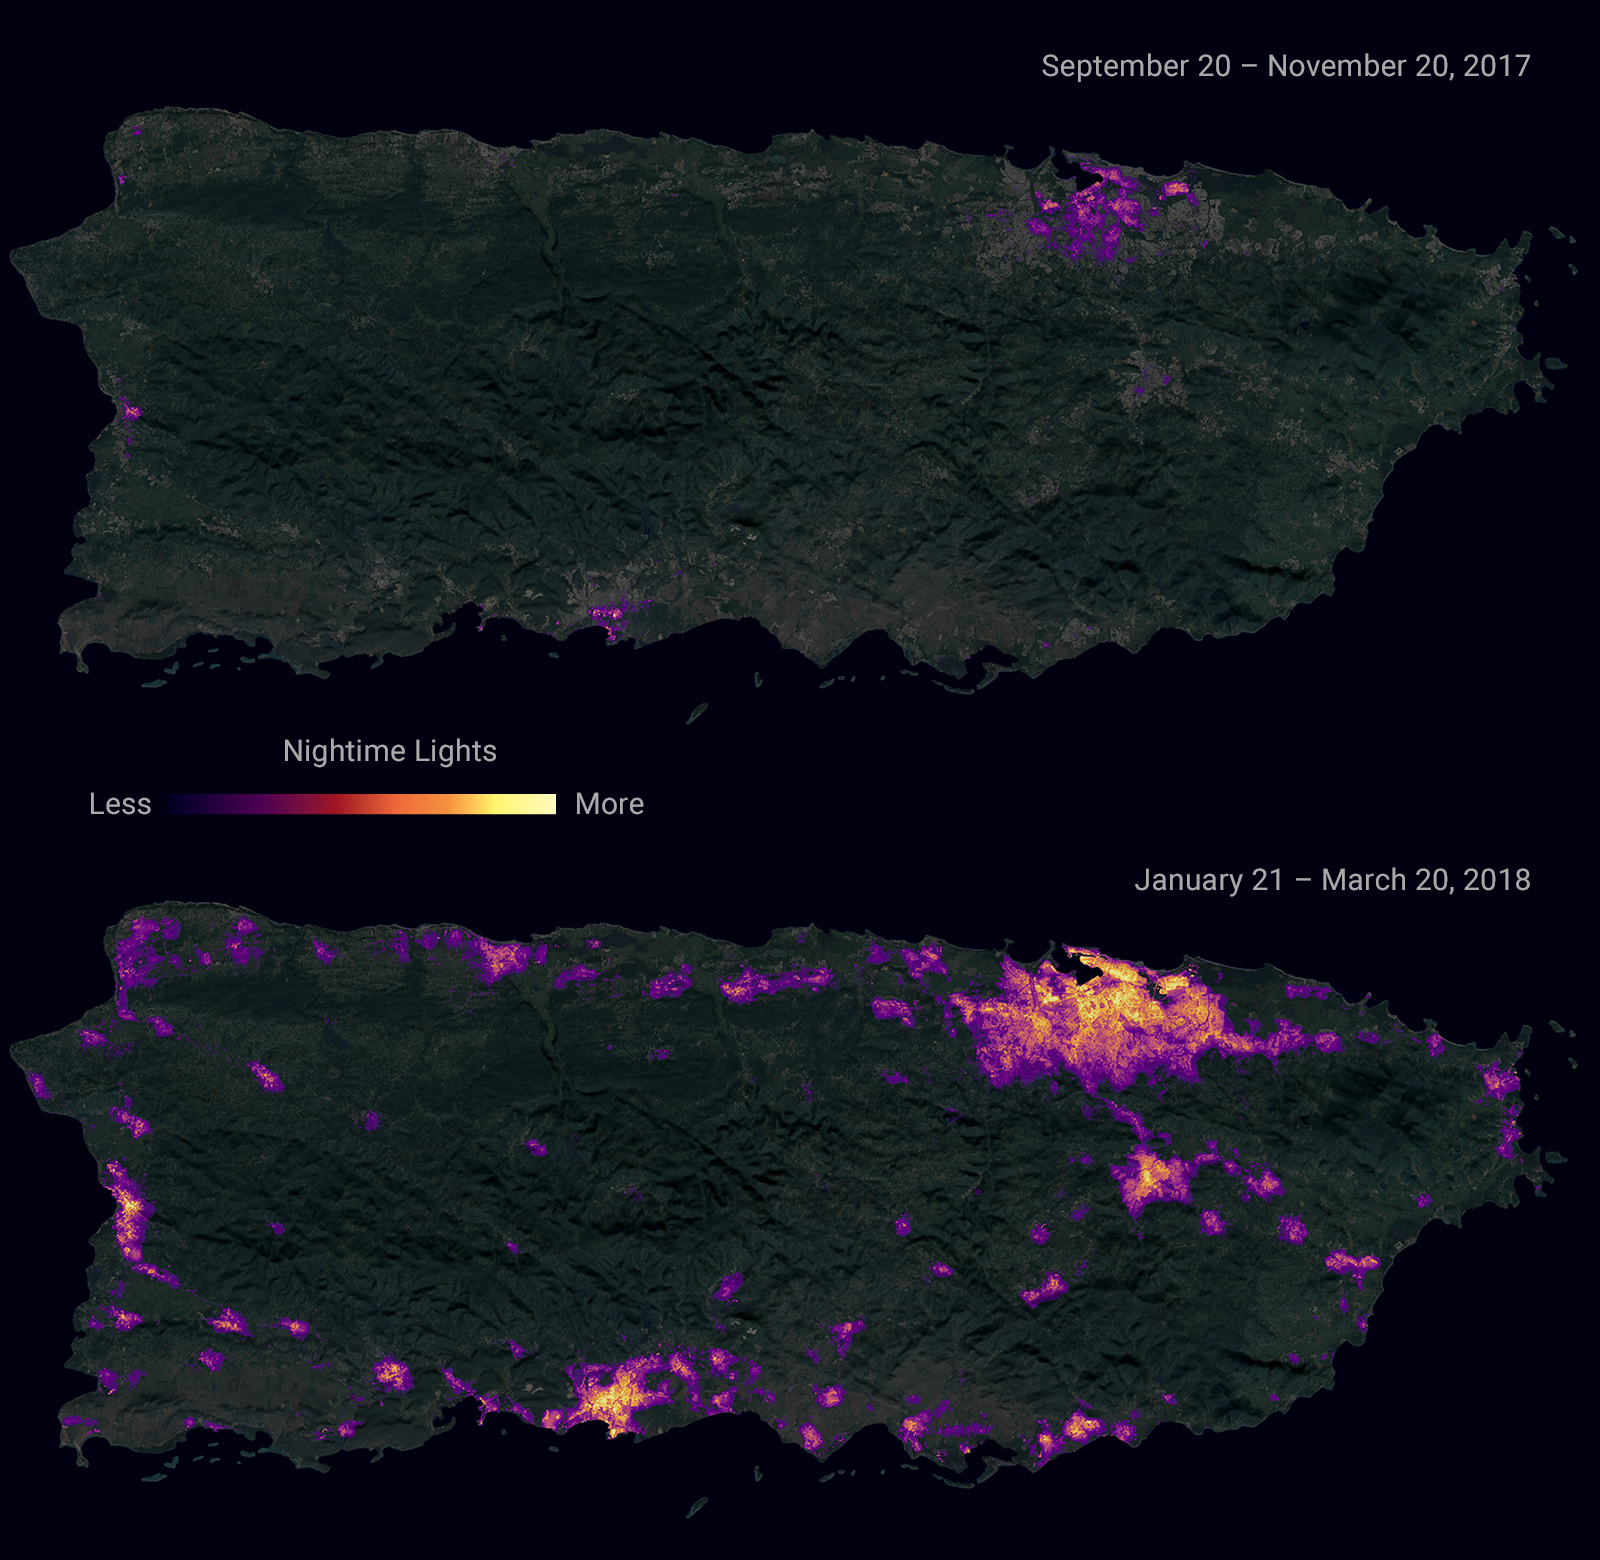 Two images of Puerto Rico, one at top and one at bottom. In both, the territory itself is rendered in greyscale with indication of lights at night in purple (dimmest), orange and yellow (brightest). In the top image from Sept. to Nov. 2017, only a small number of purple spots are on the map. In the bottom image from Jan. to March 2018, the island has begun to recover, with lights indicated around nearly the entire border in shades of mostly purple but also some orange and yellow.